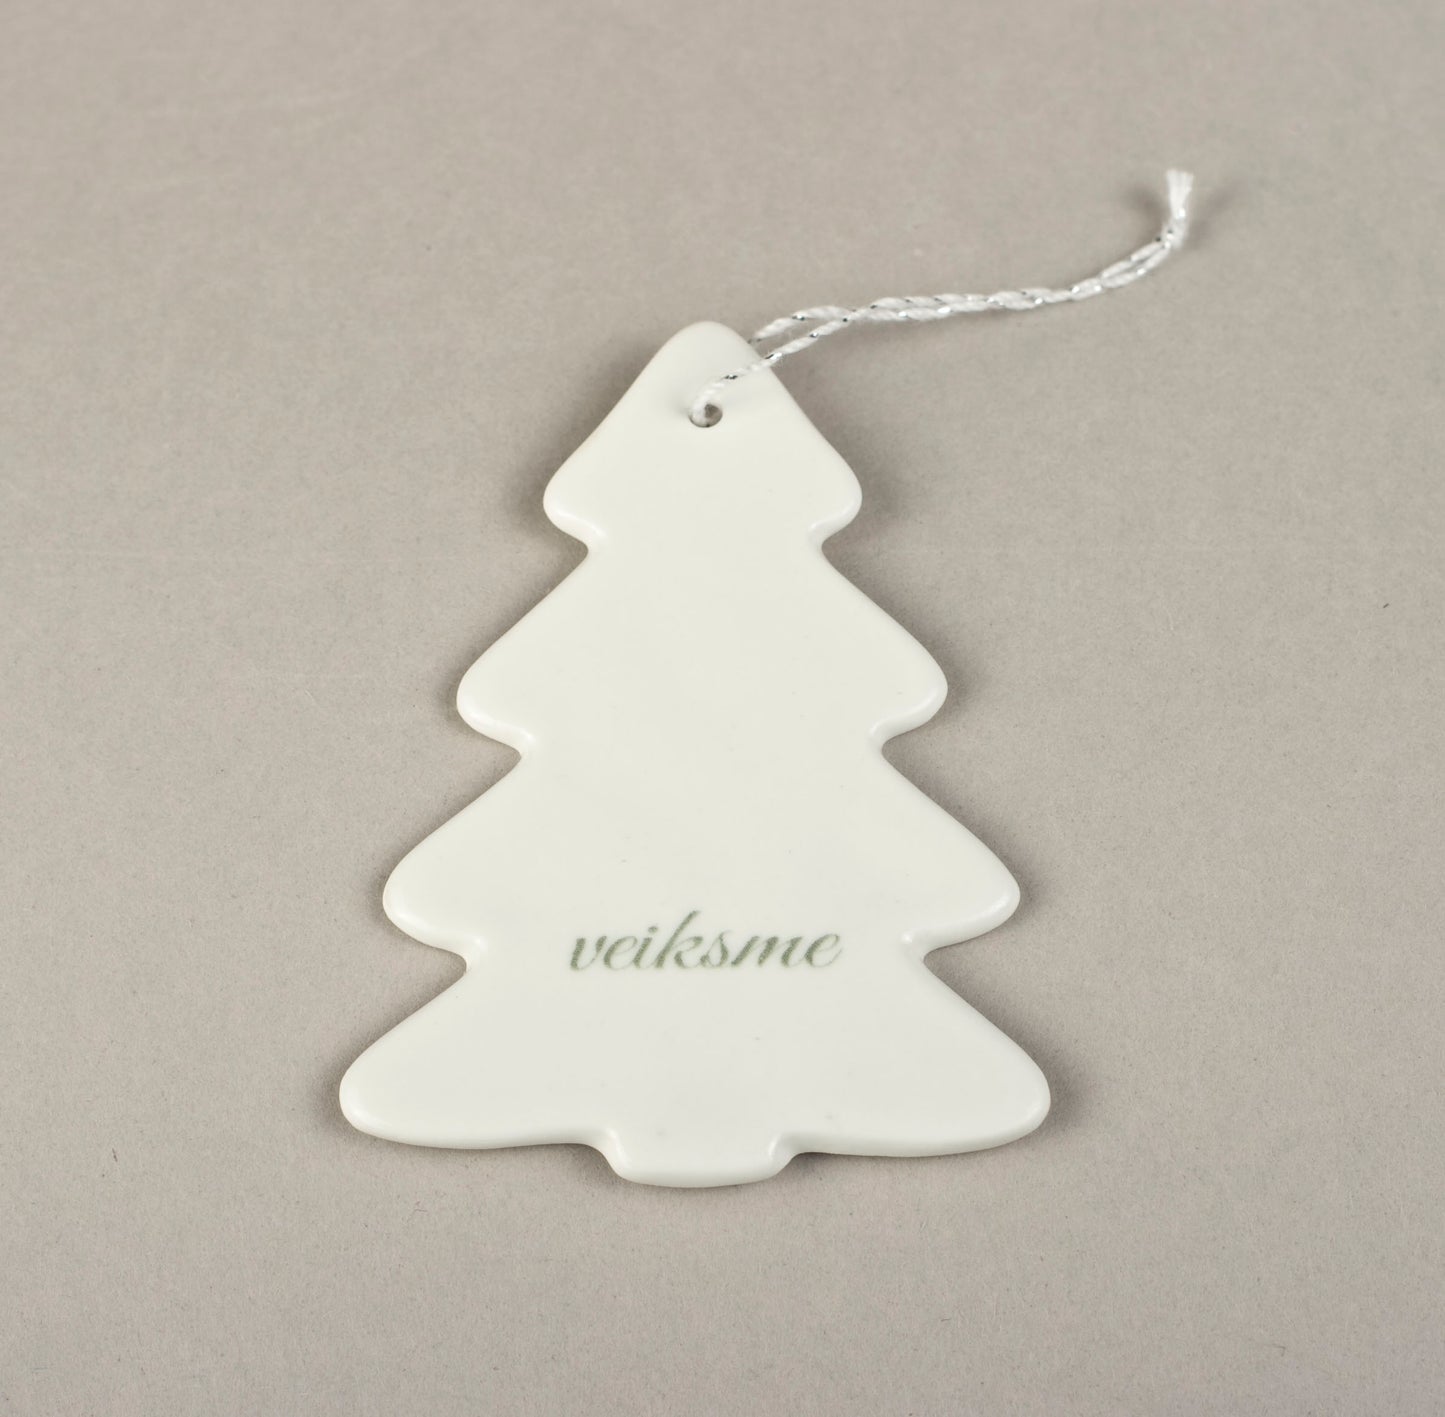 Porcelain Decorations For Christmas Trees - Christmas Tree With Print